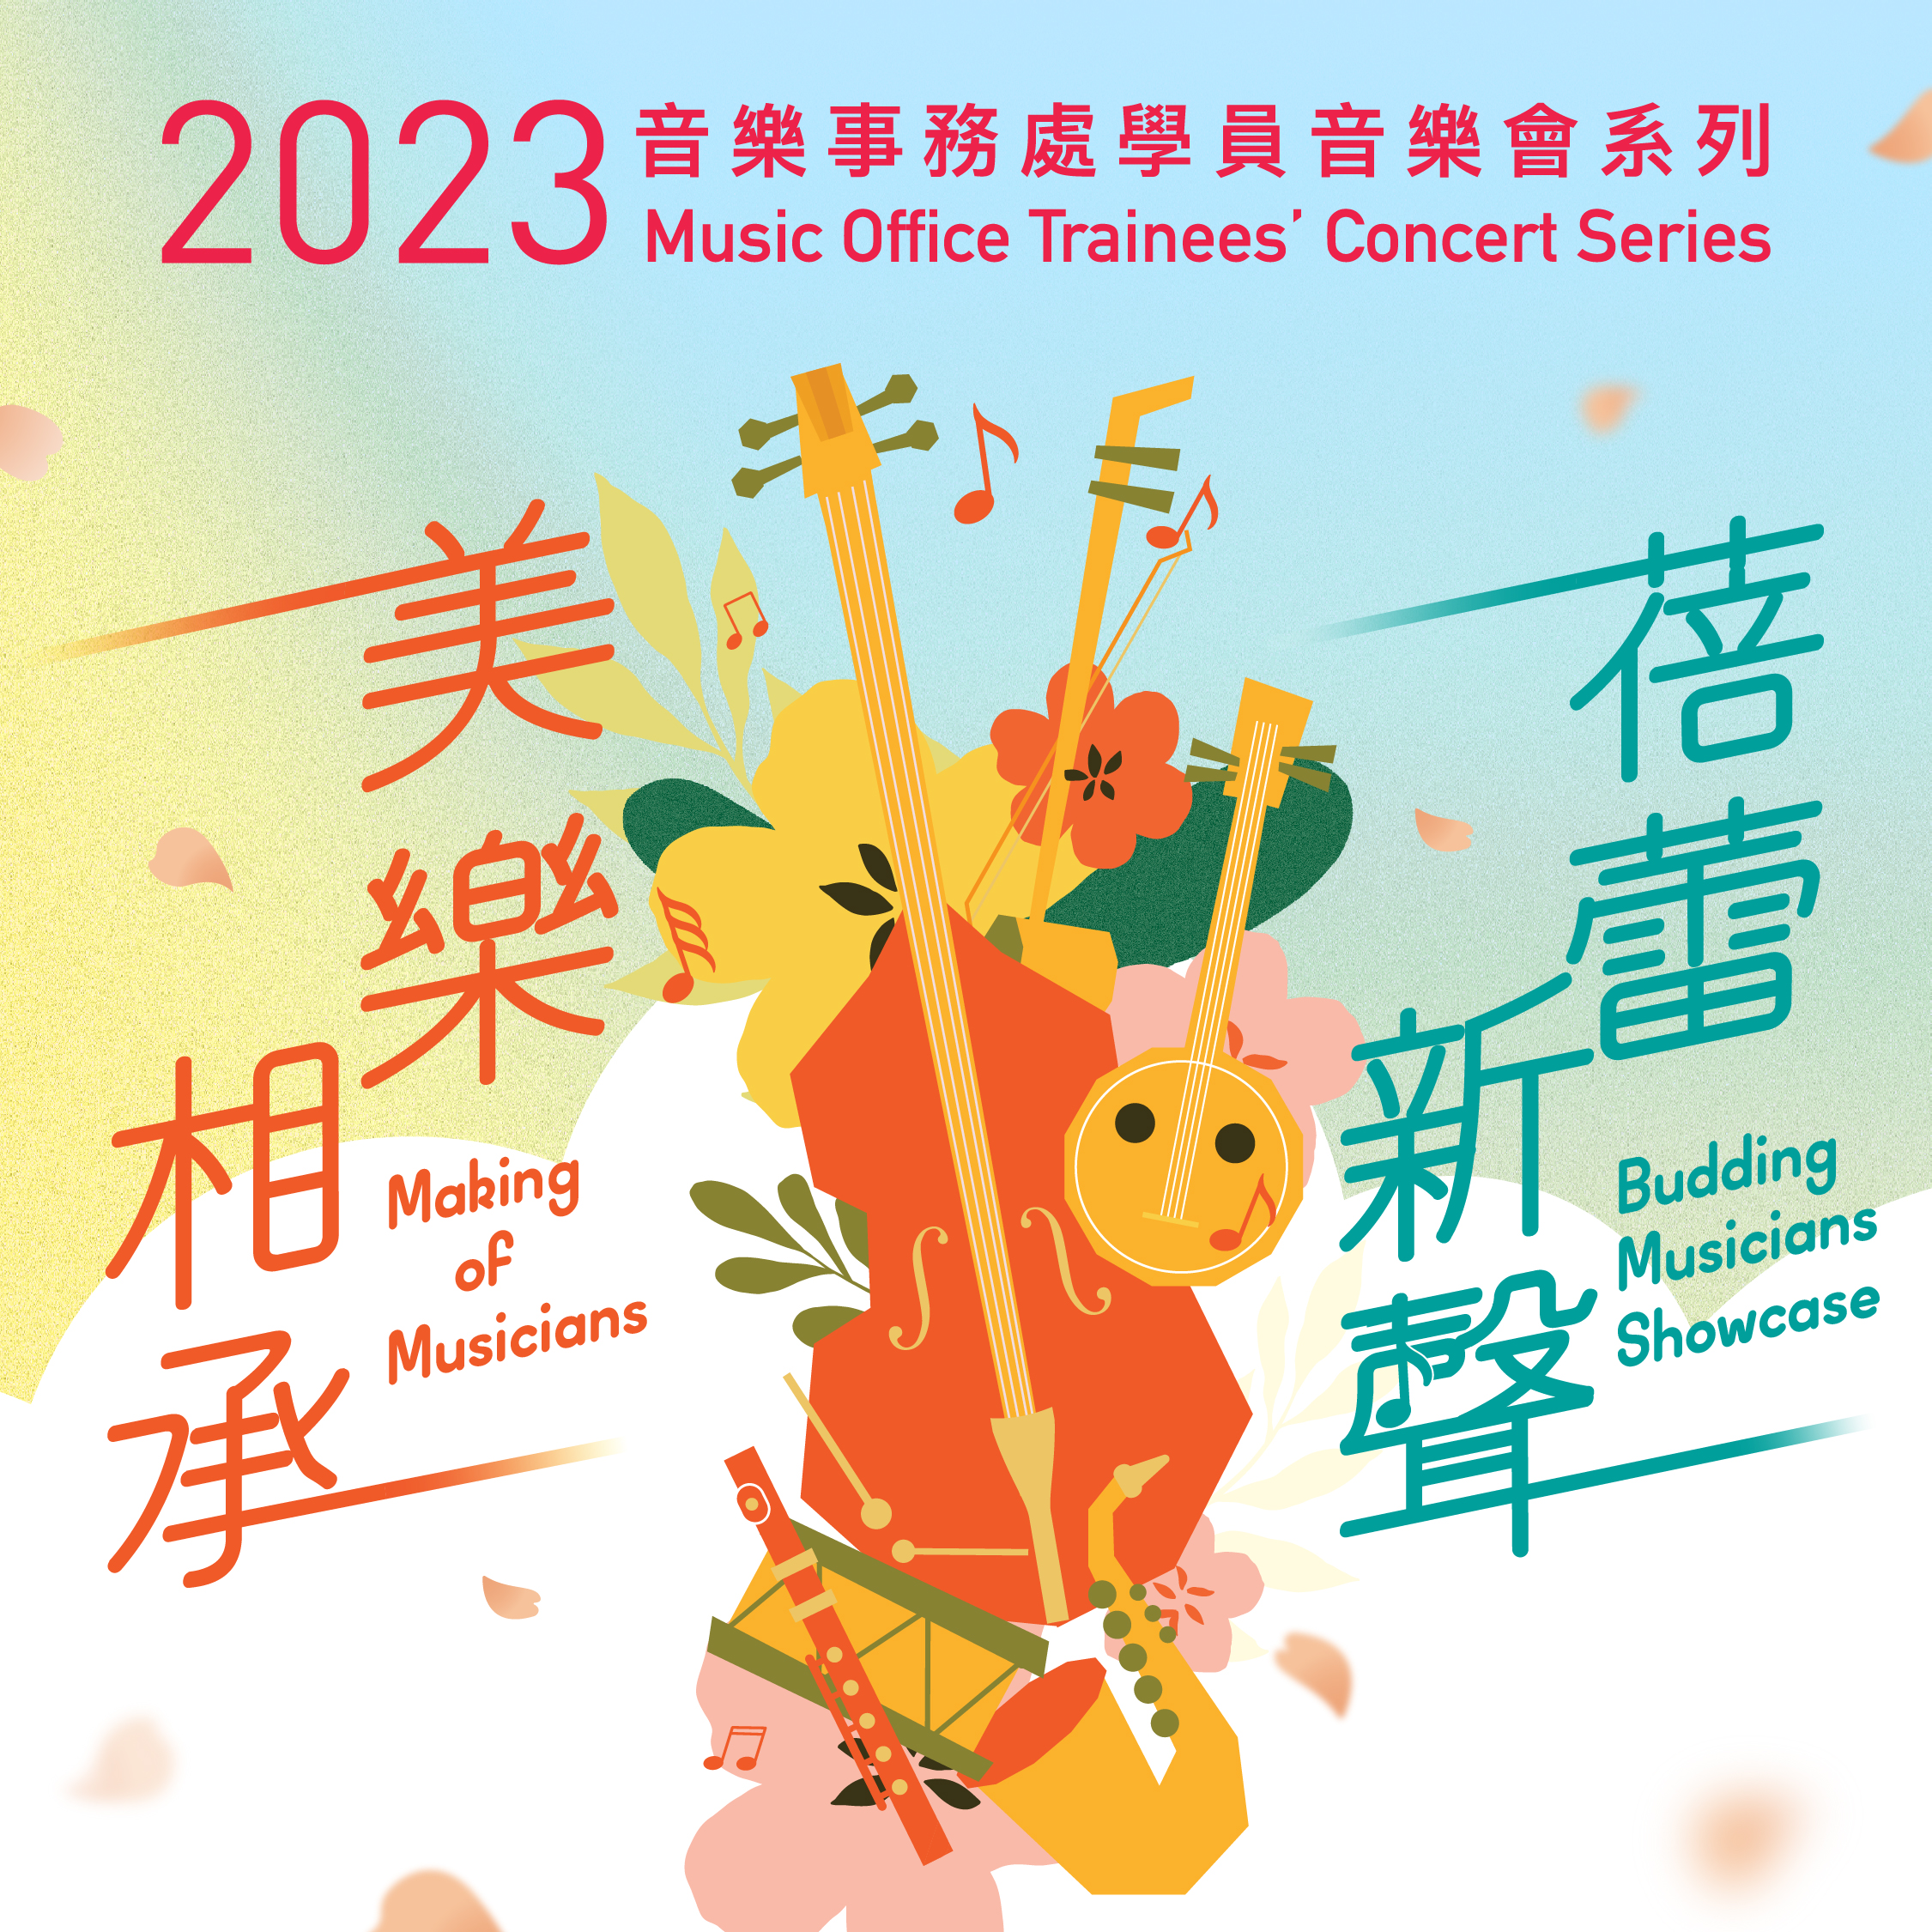 2023 “Making of Musicians” and “Budding Musicians Showcase” Music Office Trainees’ Concerts